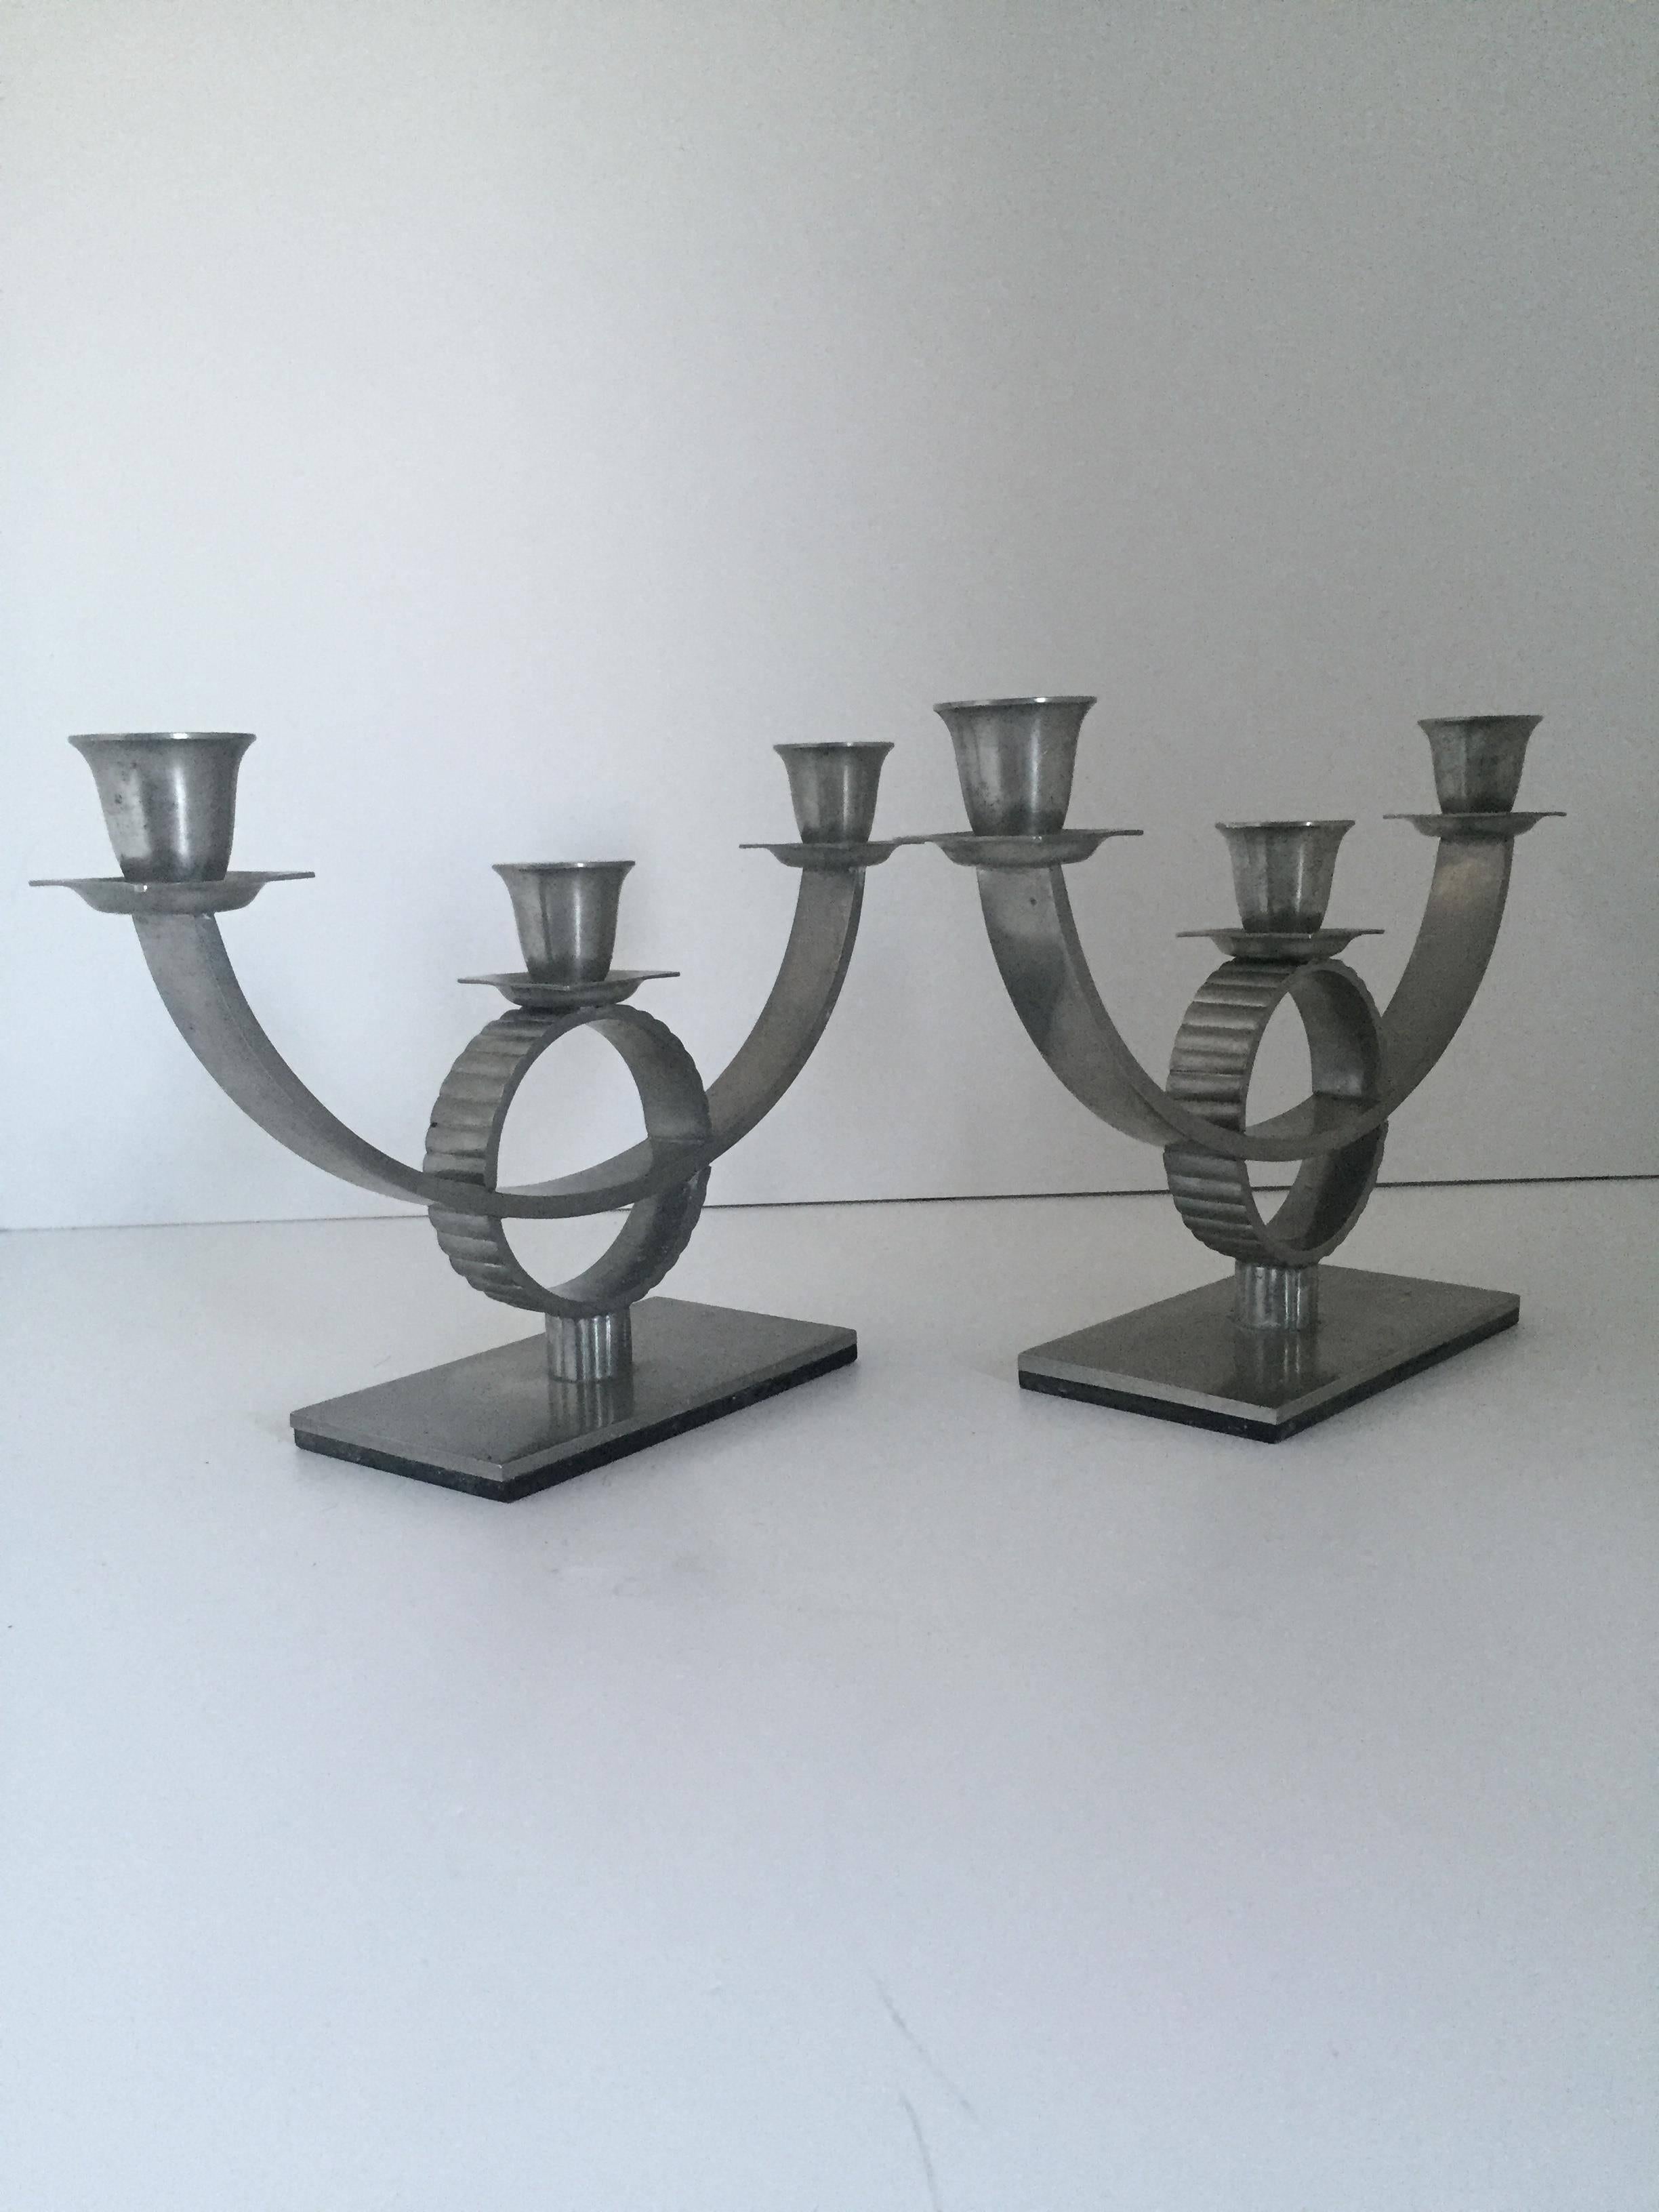 A rare pair of Swedish grace Art Deco period pewter candelabra. Very well cast and of high quality period pieces. They measure 26.5 cm wide and 17.5 cm in height. They are in a very nice condition without any repairs or dents.